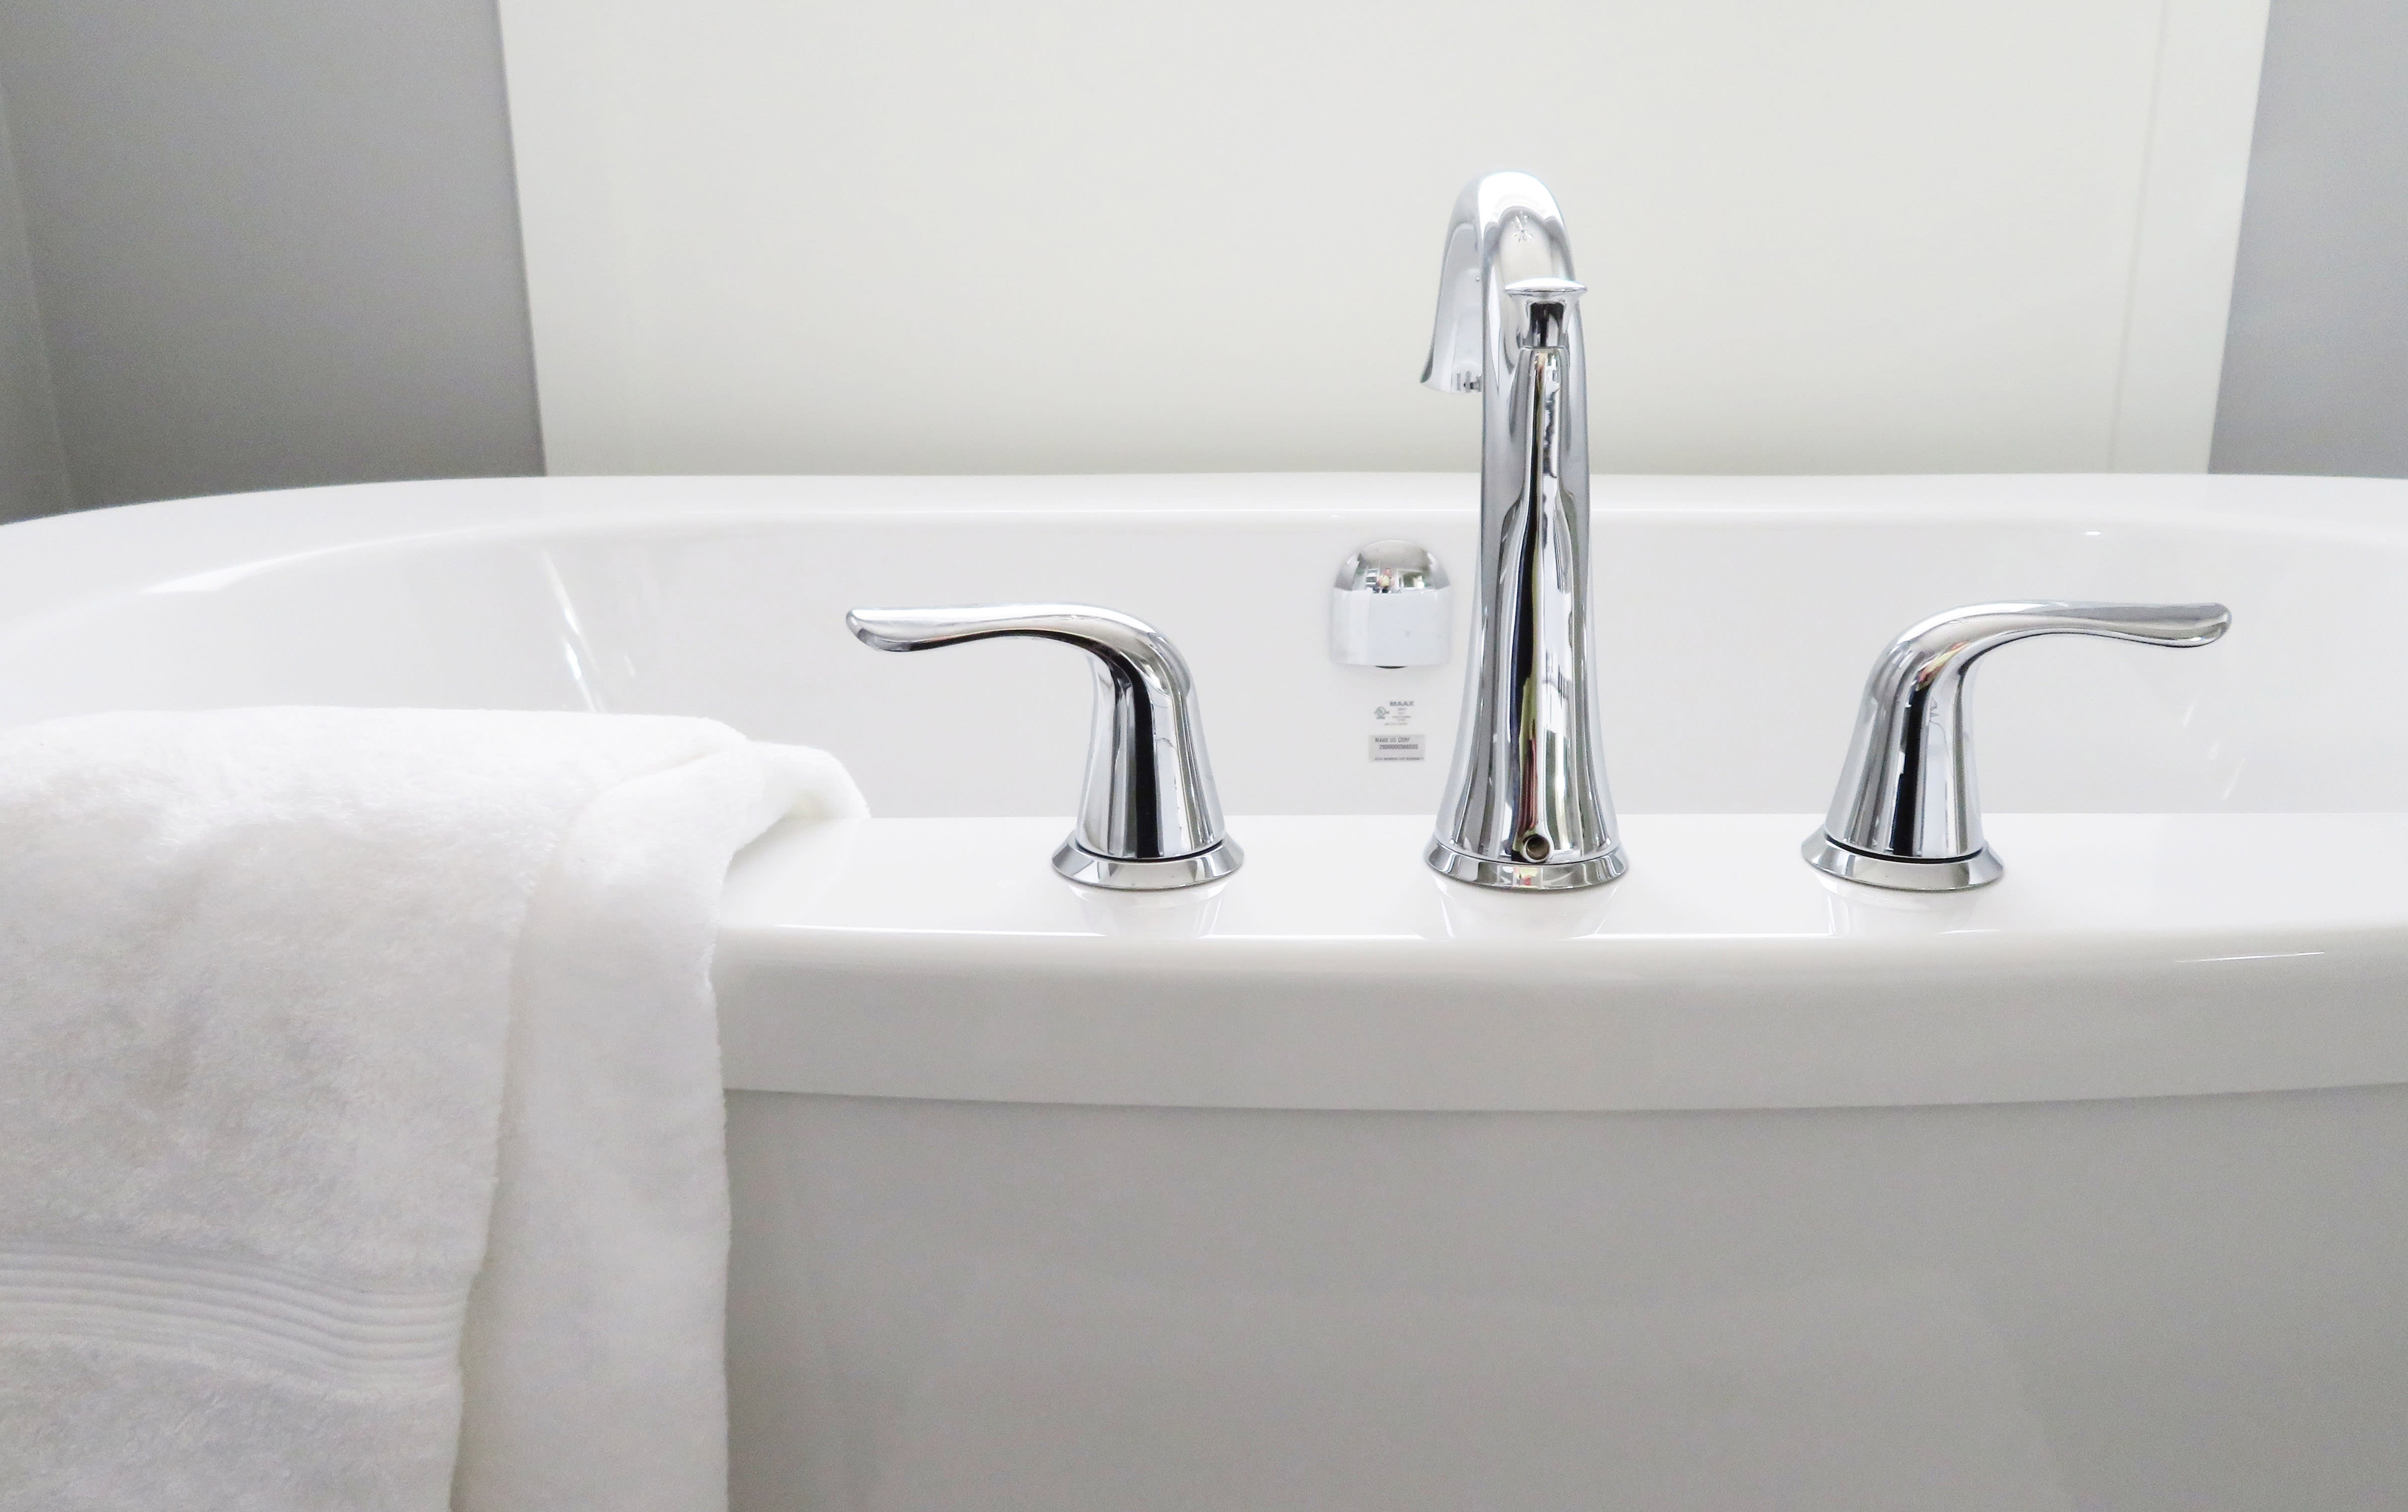 5 Ways To Clean An Old Porcelain Tub, How To Clean An Old Bathtub